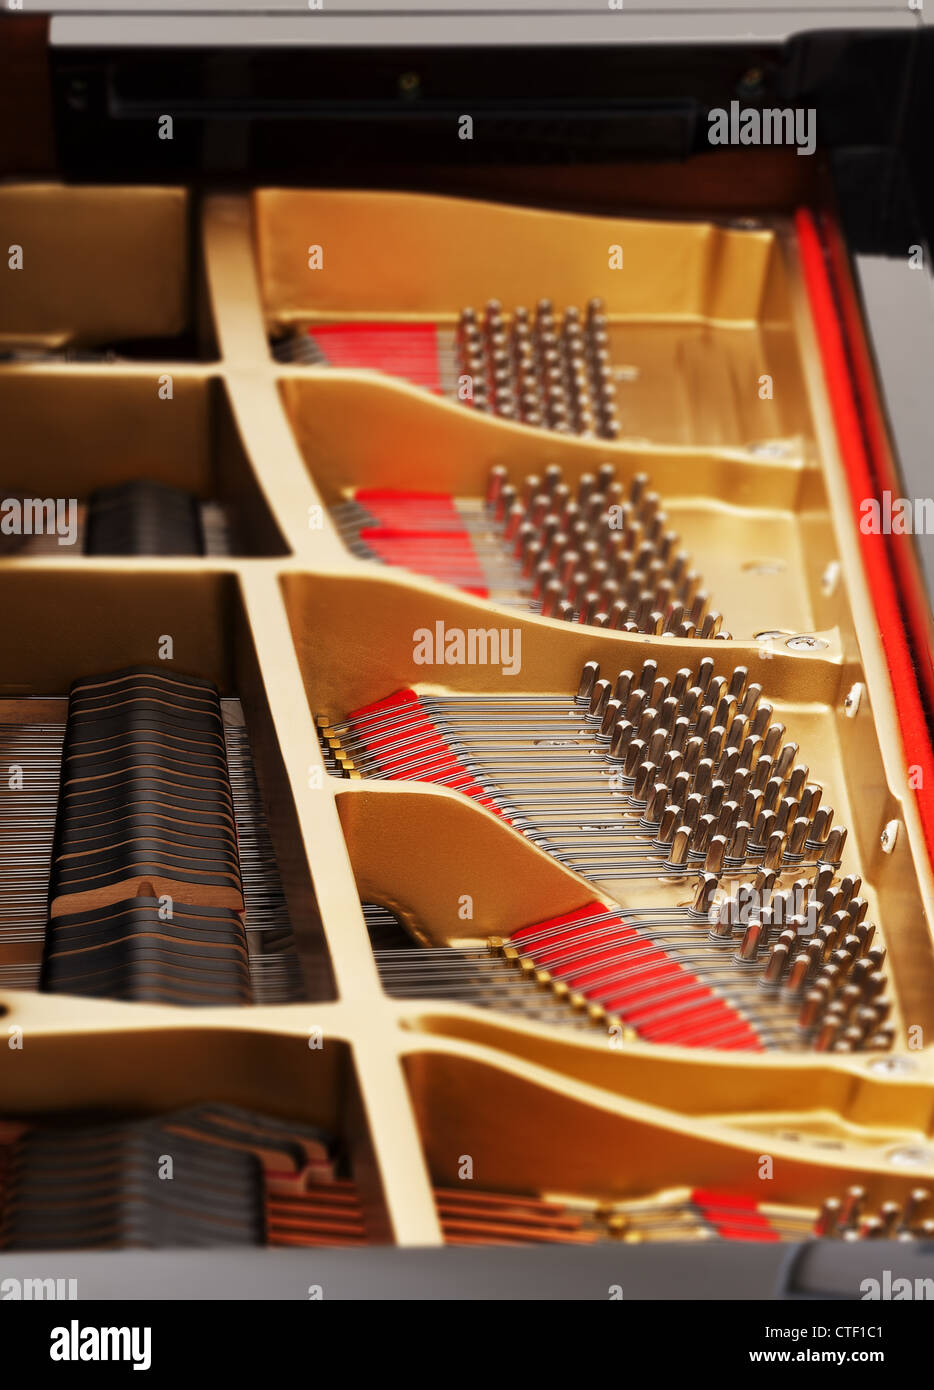 Detailed interior of grand piano showing the strings, pegs, sound board with focus on one section Stock Photo